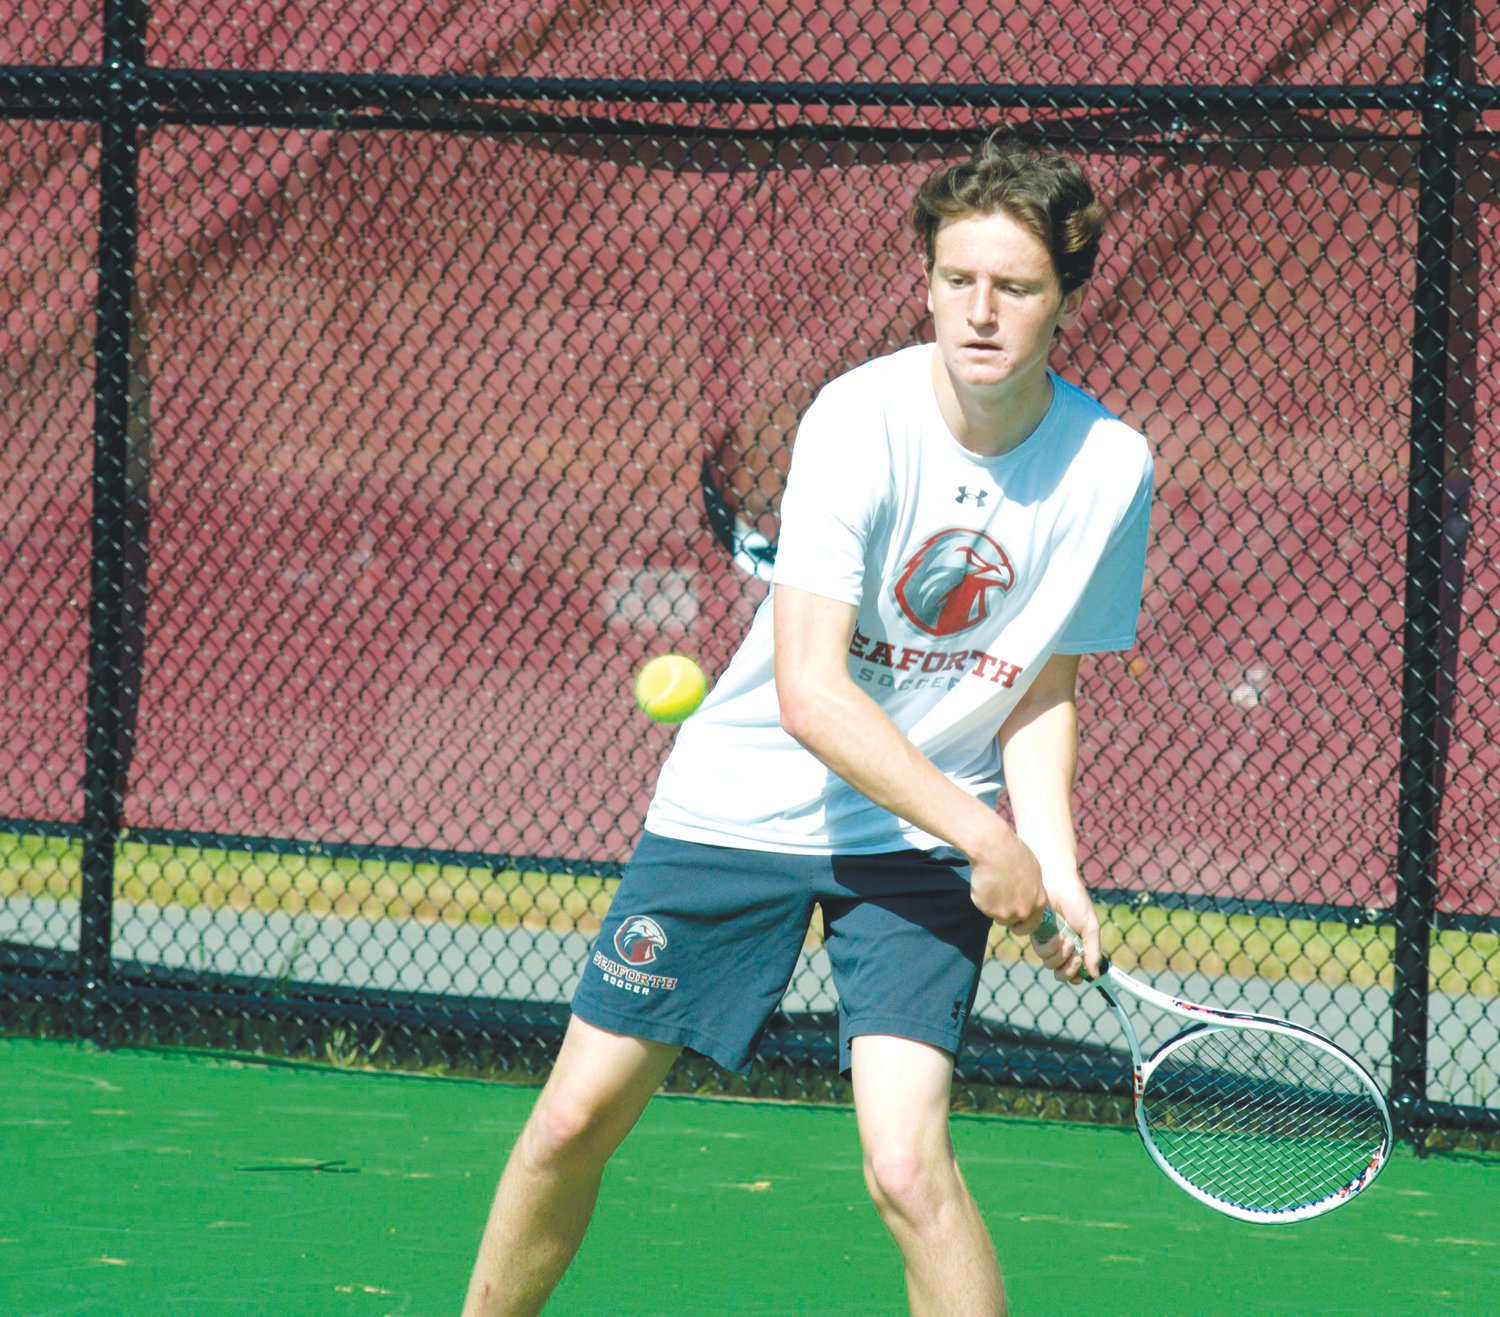 Seaforth sophomore Walker Magrinat returns a volley in his singles match against Raleigh Charter junior Ryan Hill on April 27. The Hawks – including Magrinat, who lost to Hill, 2-6, 1-6 — never left the nest in their battle with Raleigh Charter, losing 8-1 in the first round of the NCHSAA 2A dual-team playoffs.